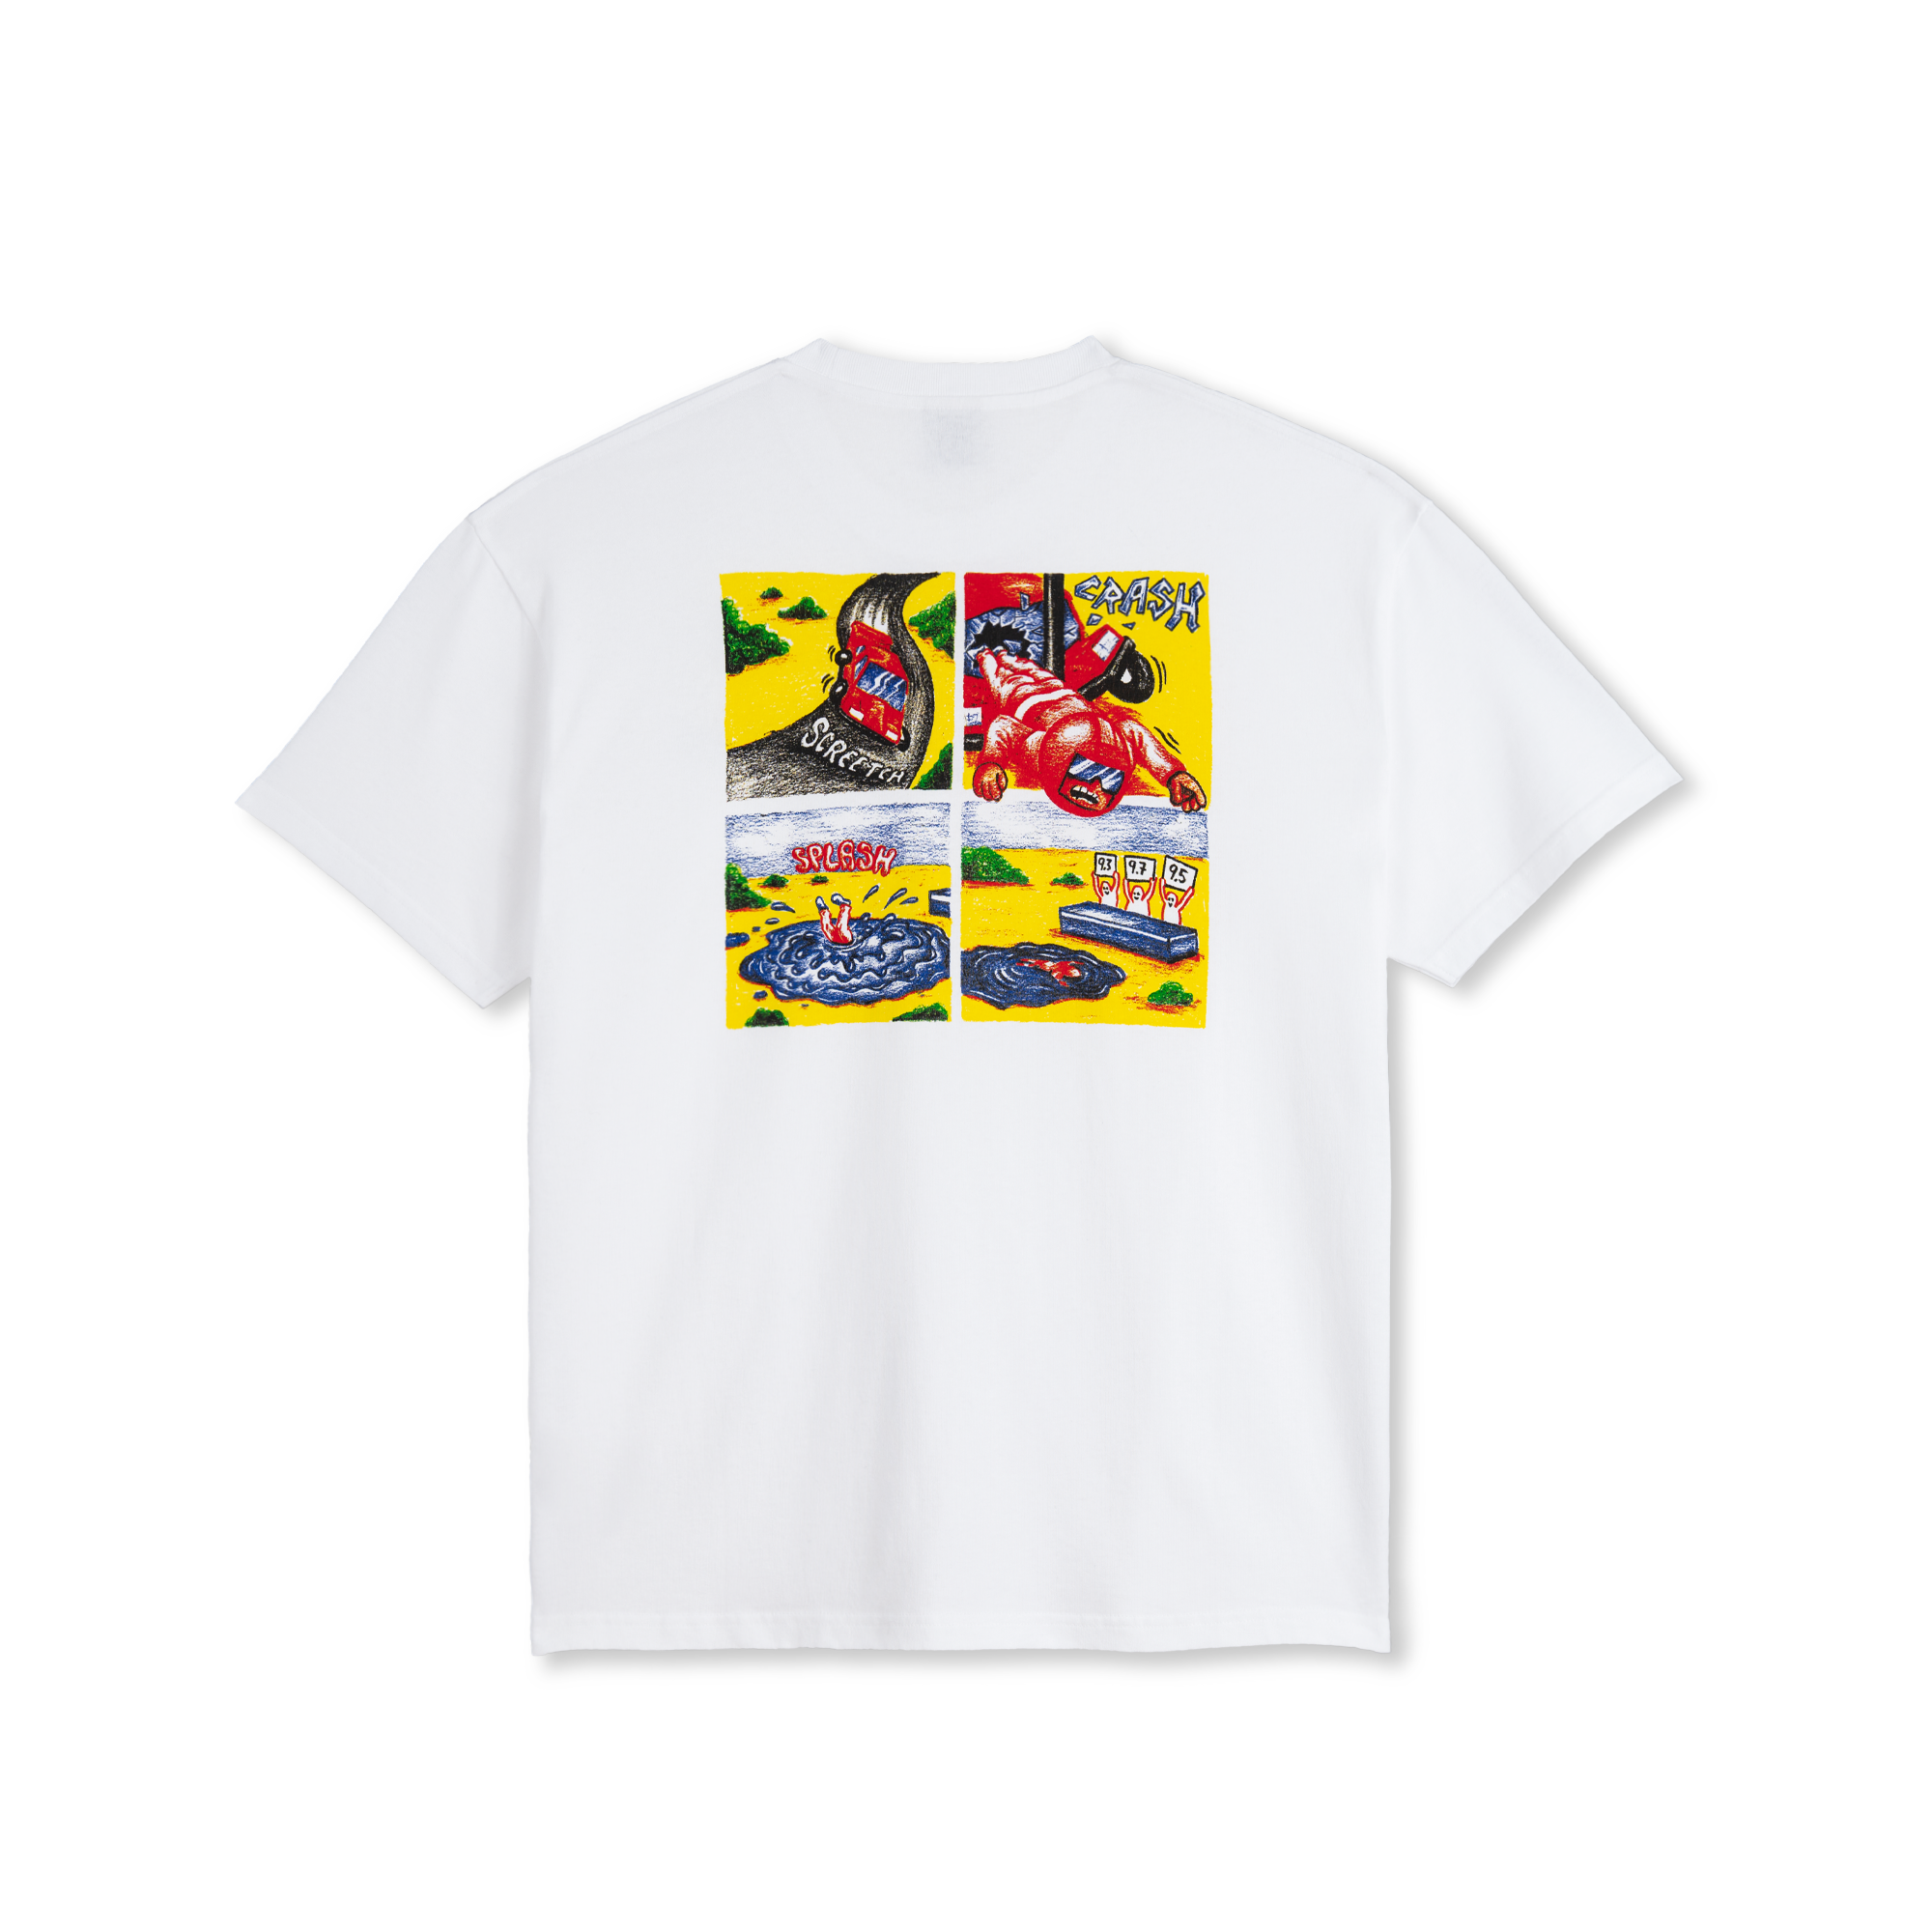 White polar T-shirt with blue outline logo on front and red and yellow cartoon panel graphic on back. Free uk shipping on orders over £50